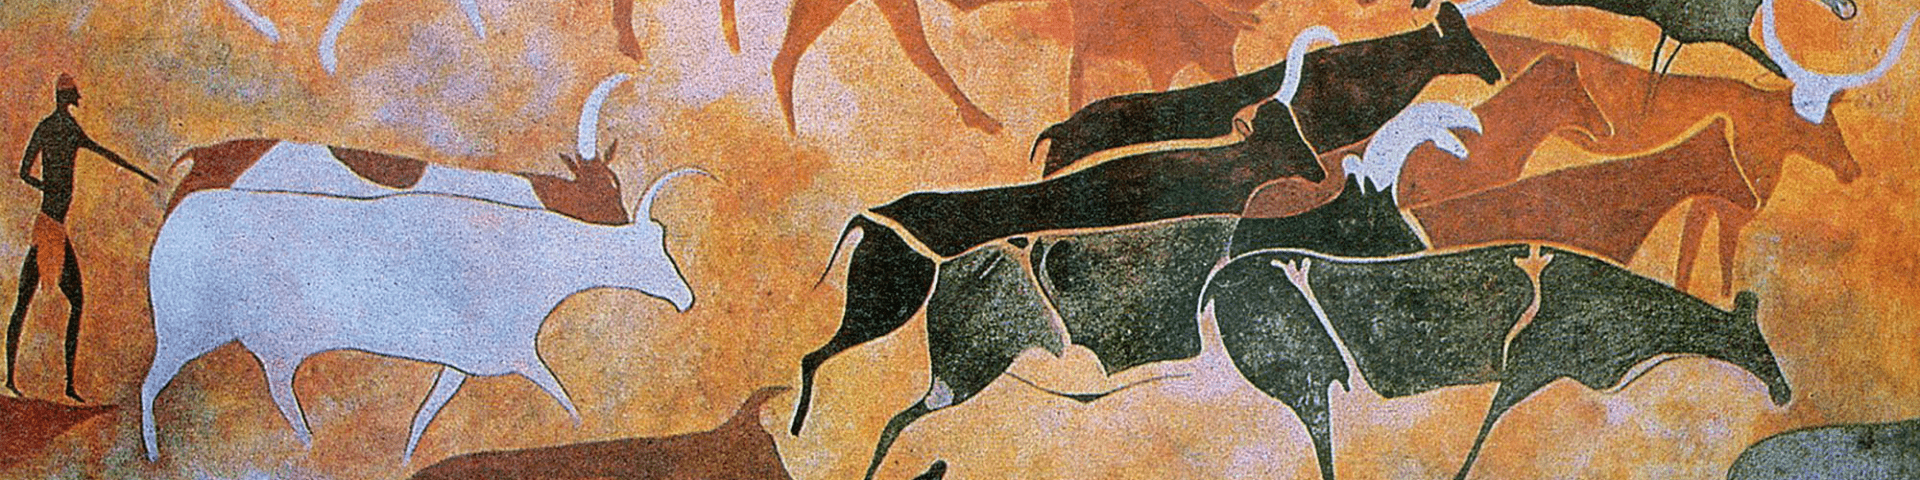 cave drawing image